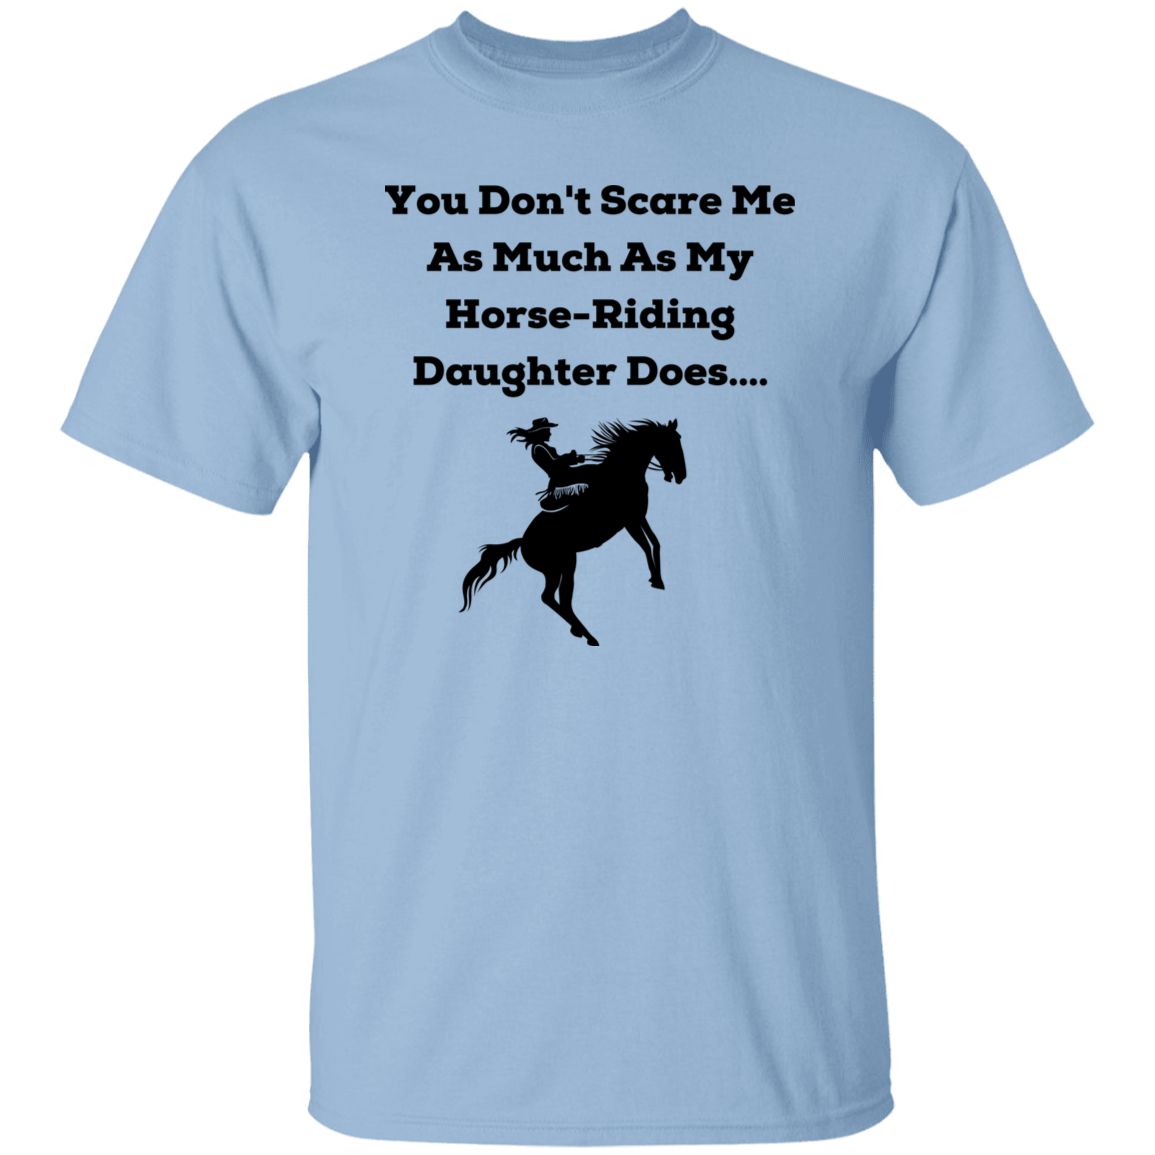 You Don't Scare Me T-Shirt Unisex